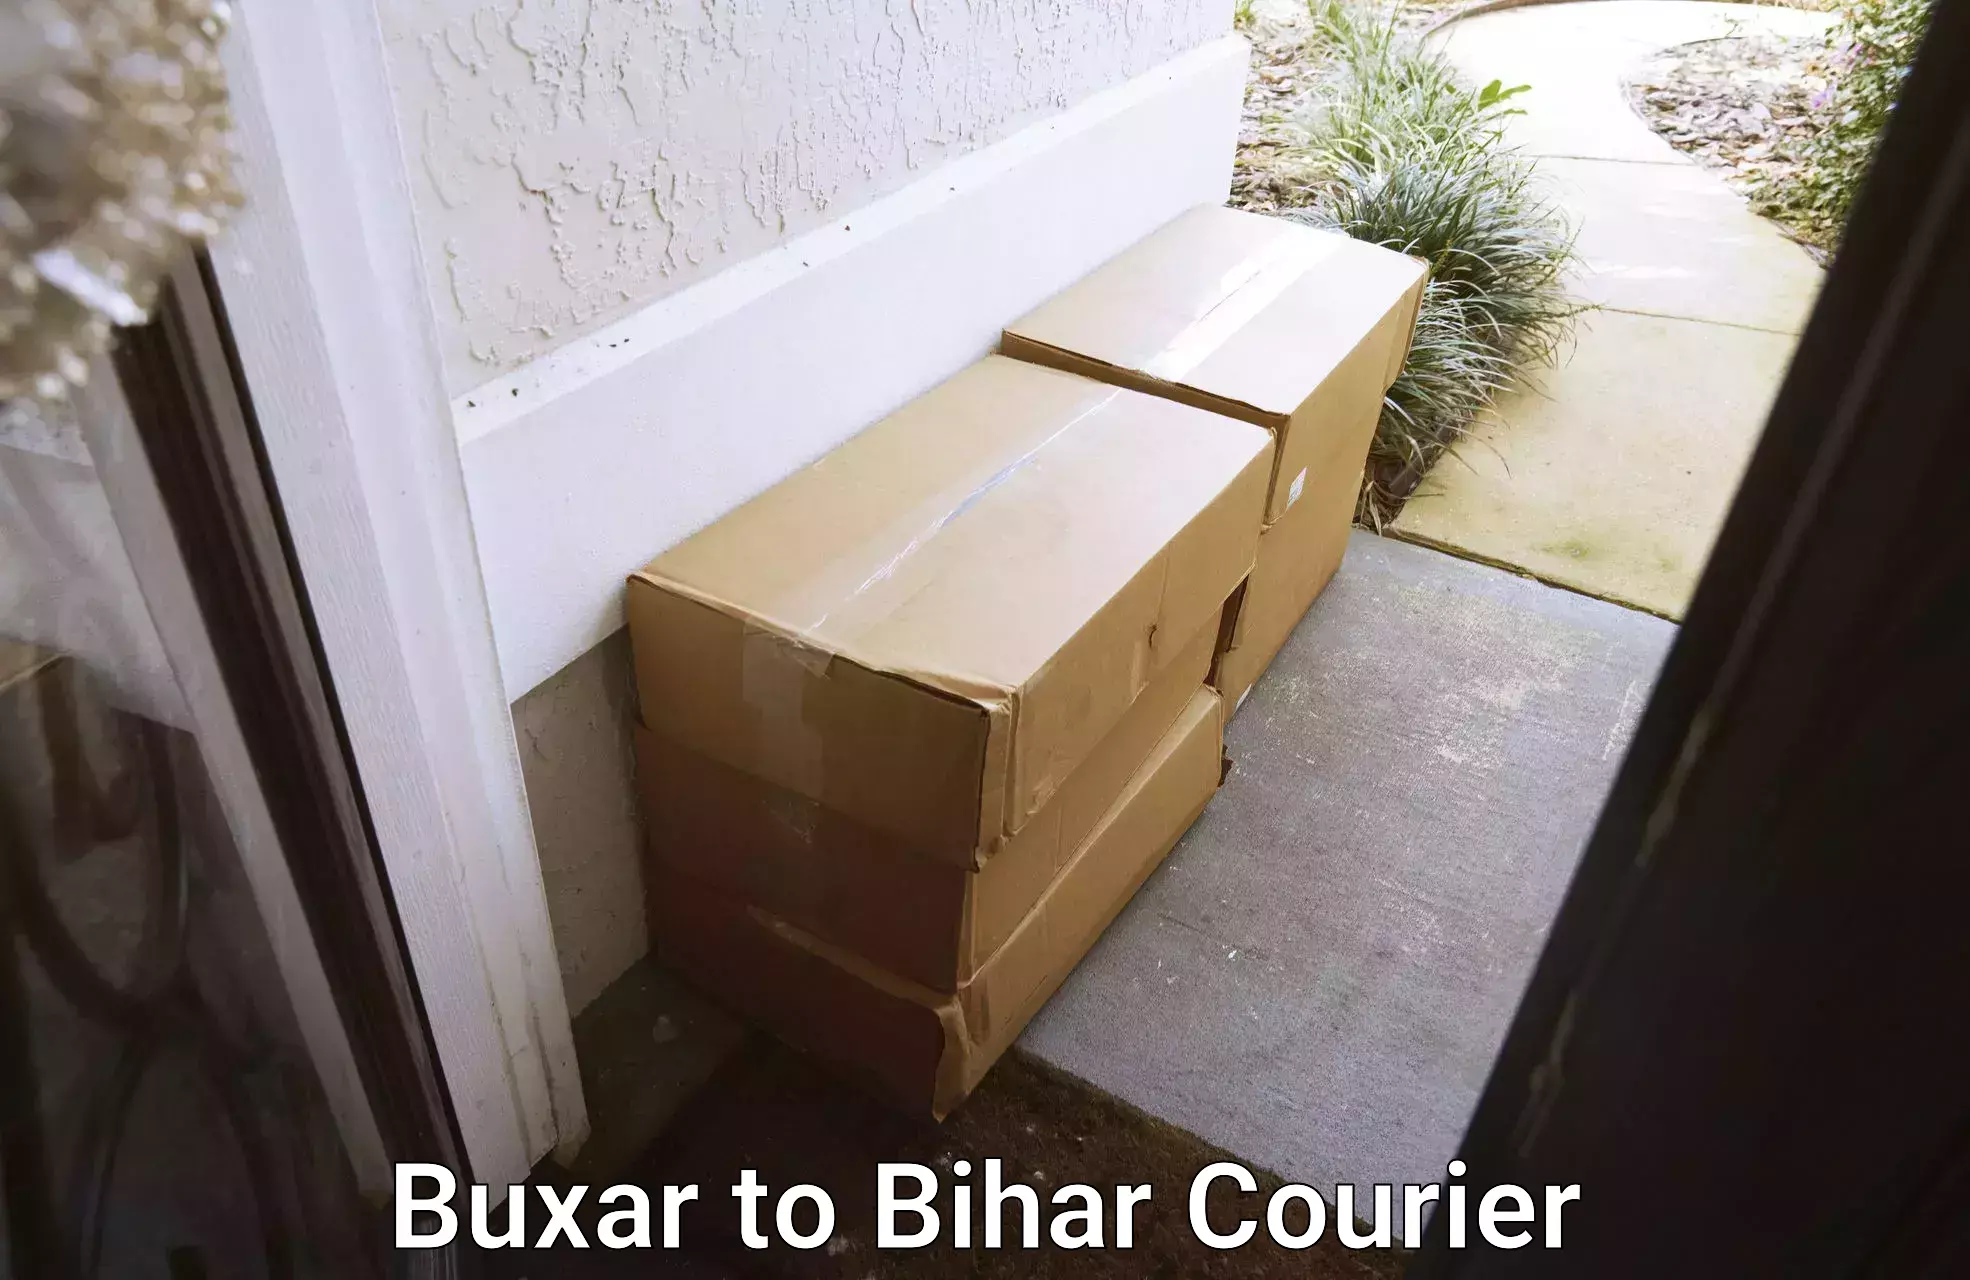 Furniture delivery service Buxar to Bihar